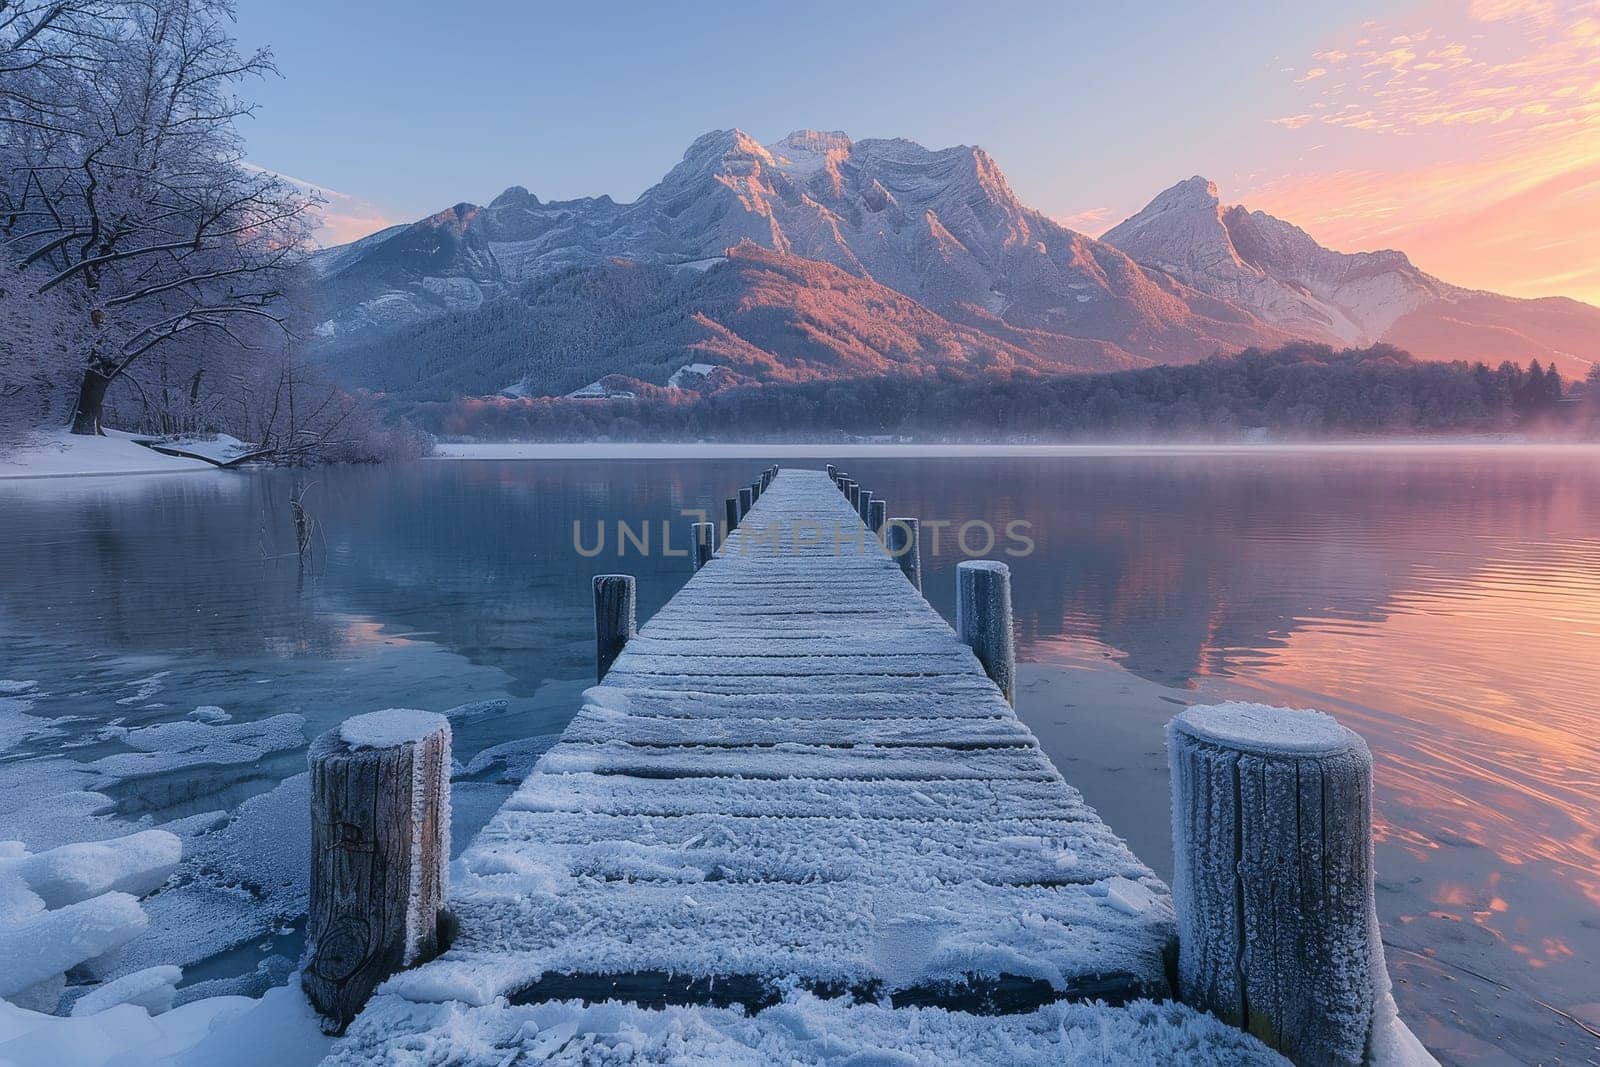 A wooden pier is in the middle of a frozen lake. The pier is surrounded by snow and the water is calm. The sky is a mix of blue and orange, creating a serene and peaceful atmosphere